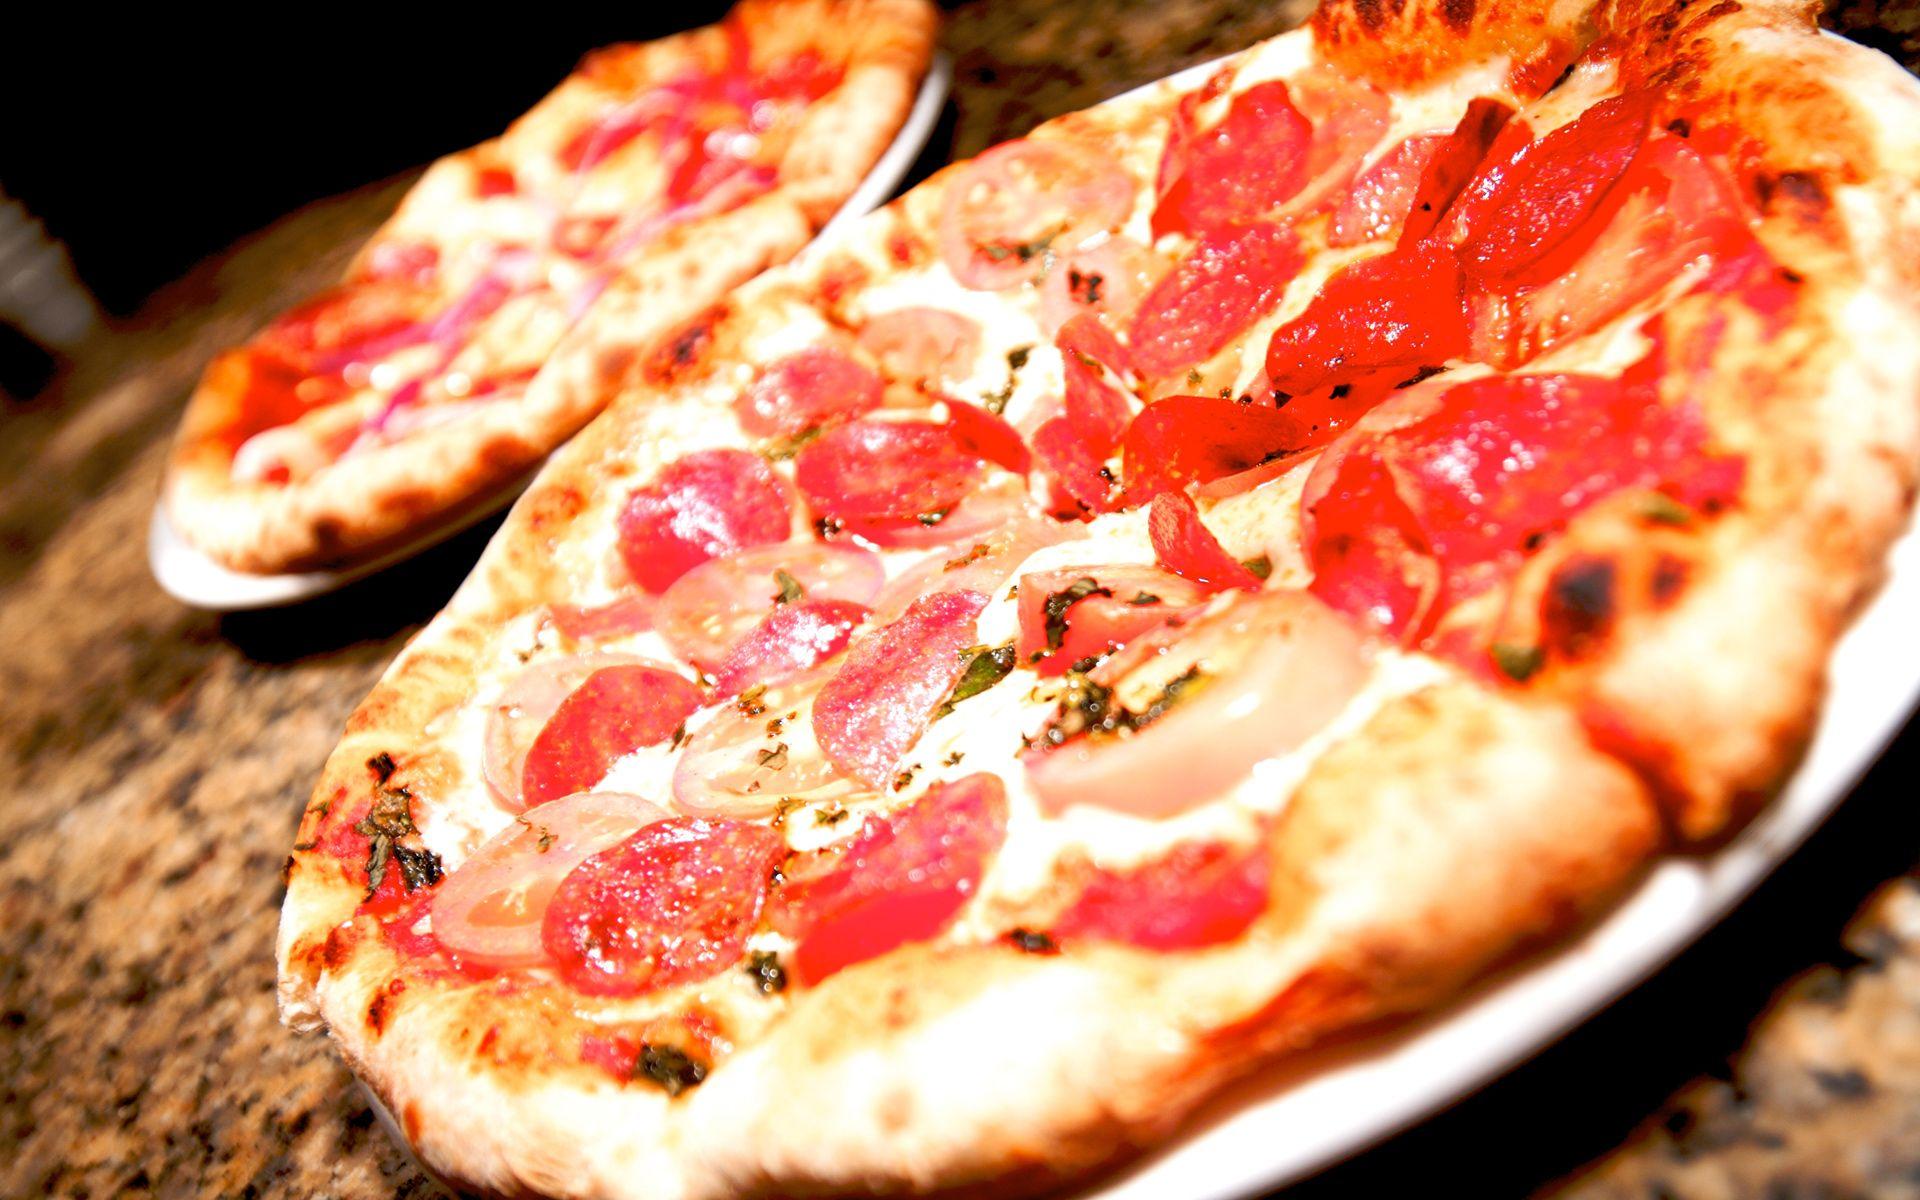 Pizza Wallpaper, 48 Pizza High Quality Image, W.Web